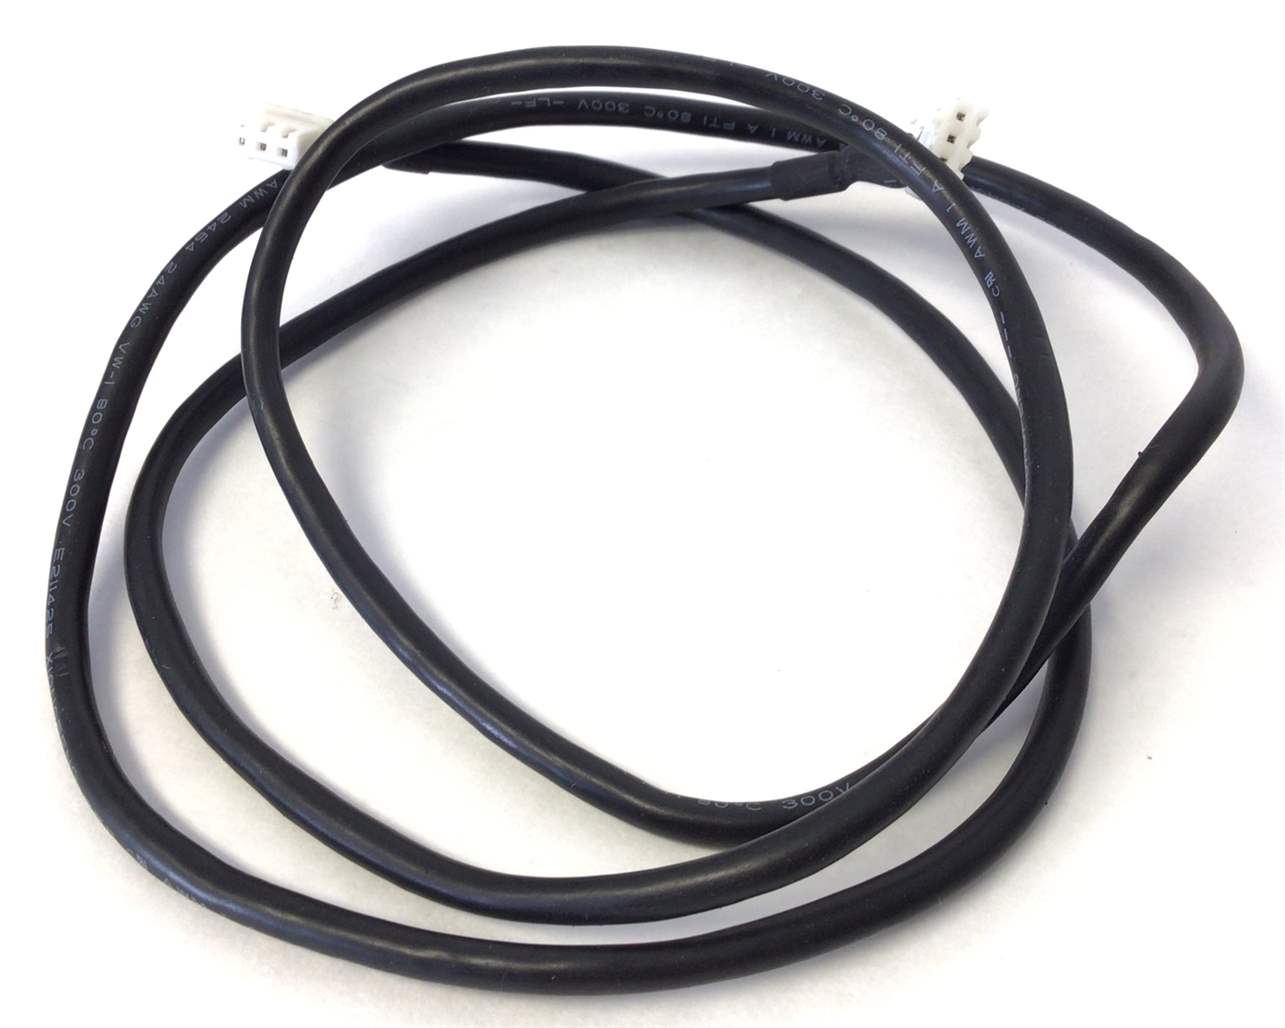 Coaxial TV Video Cable Wire (Used)